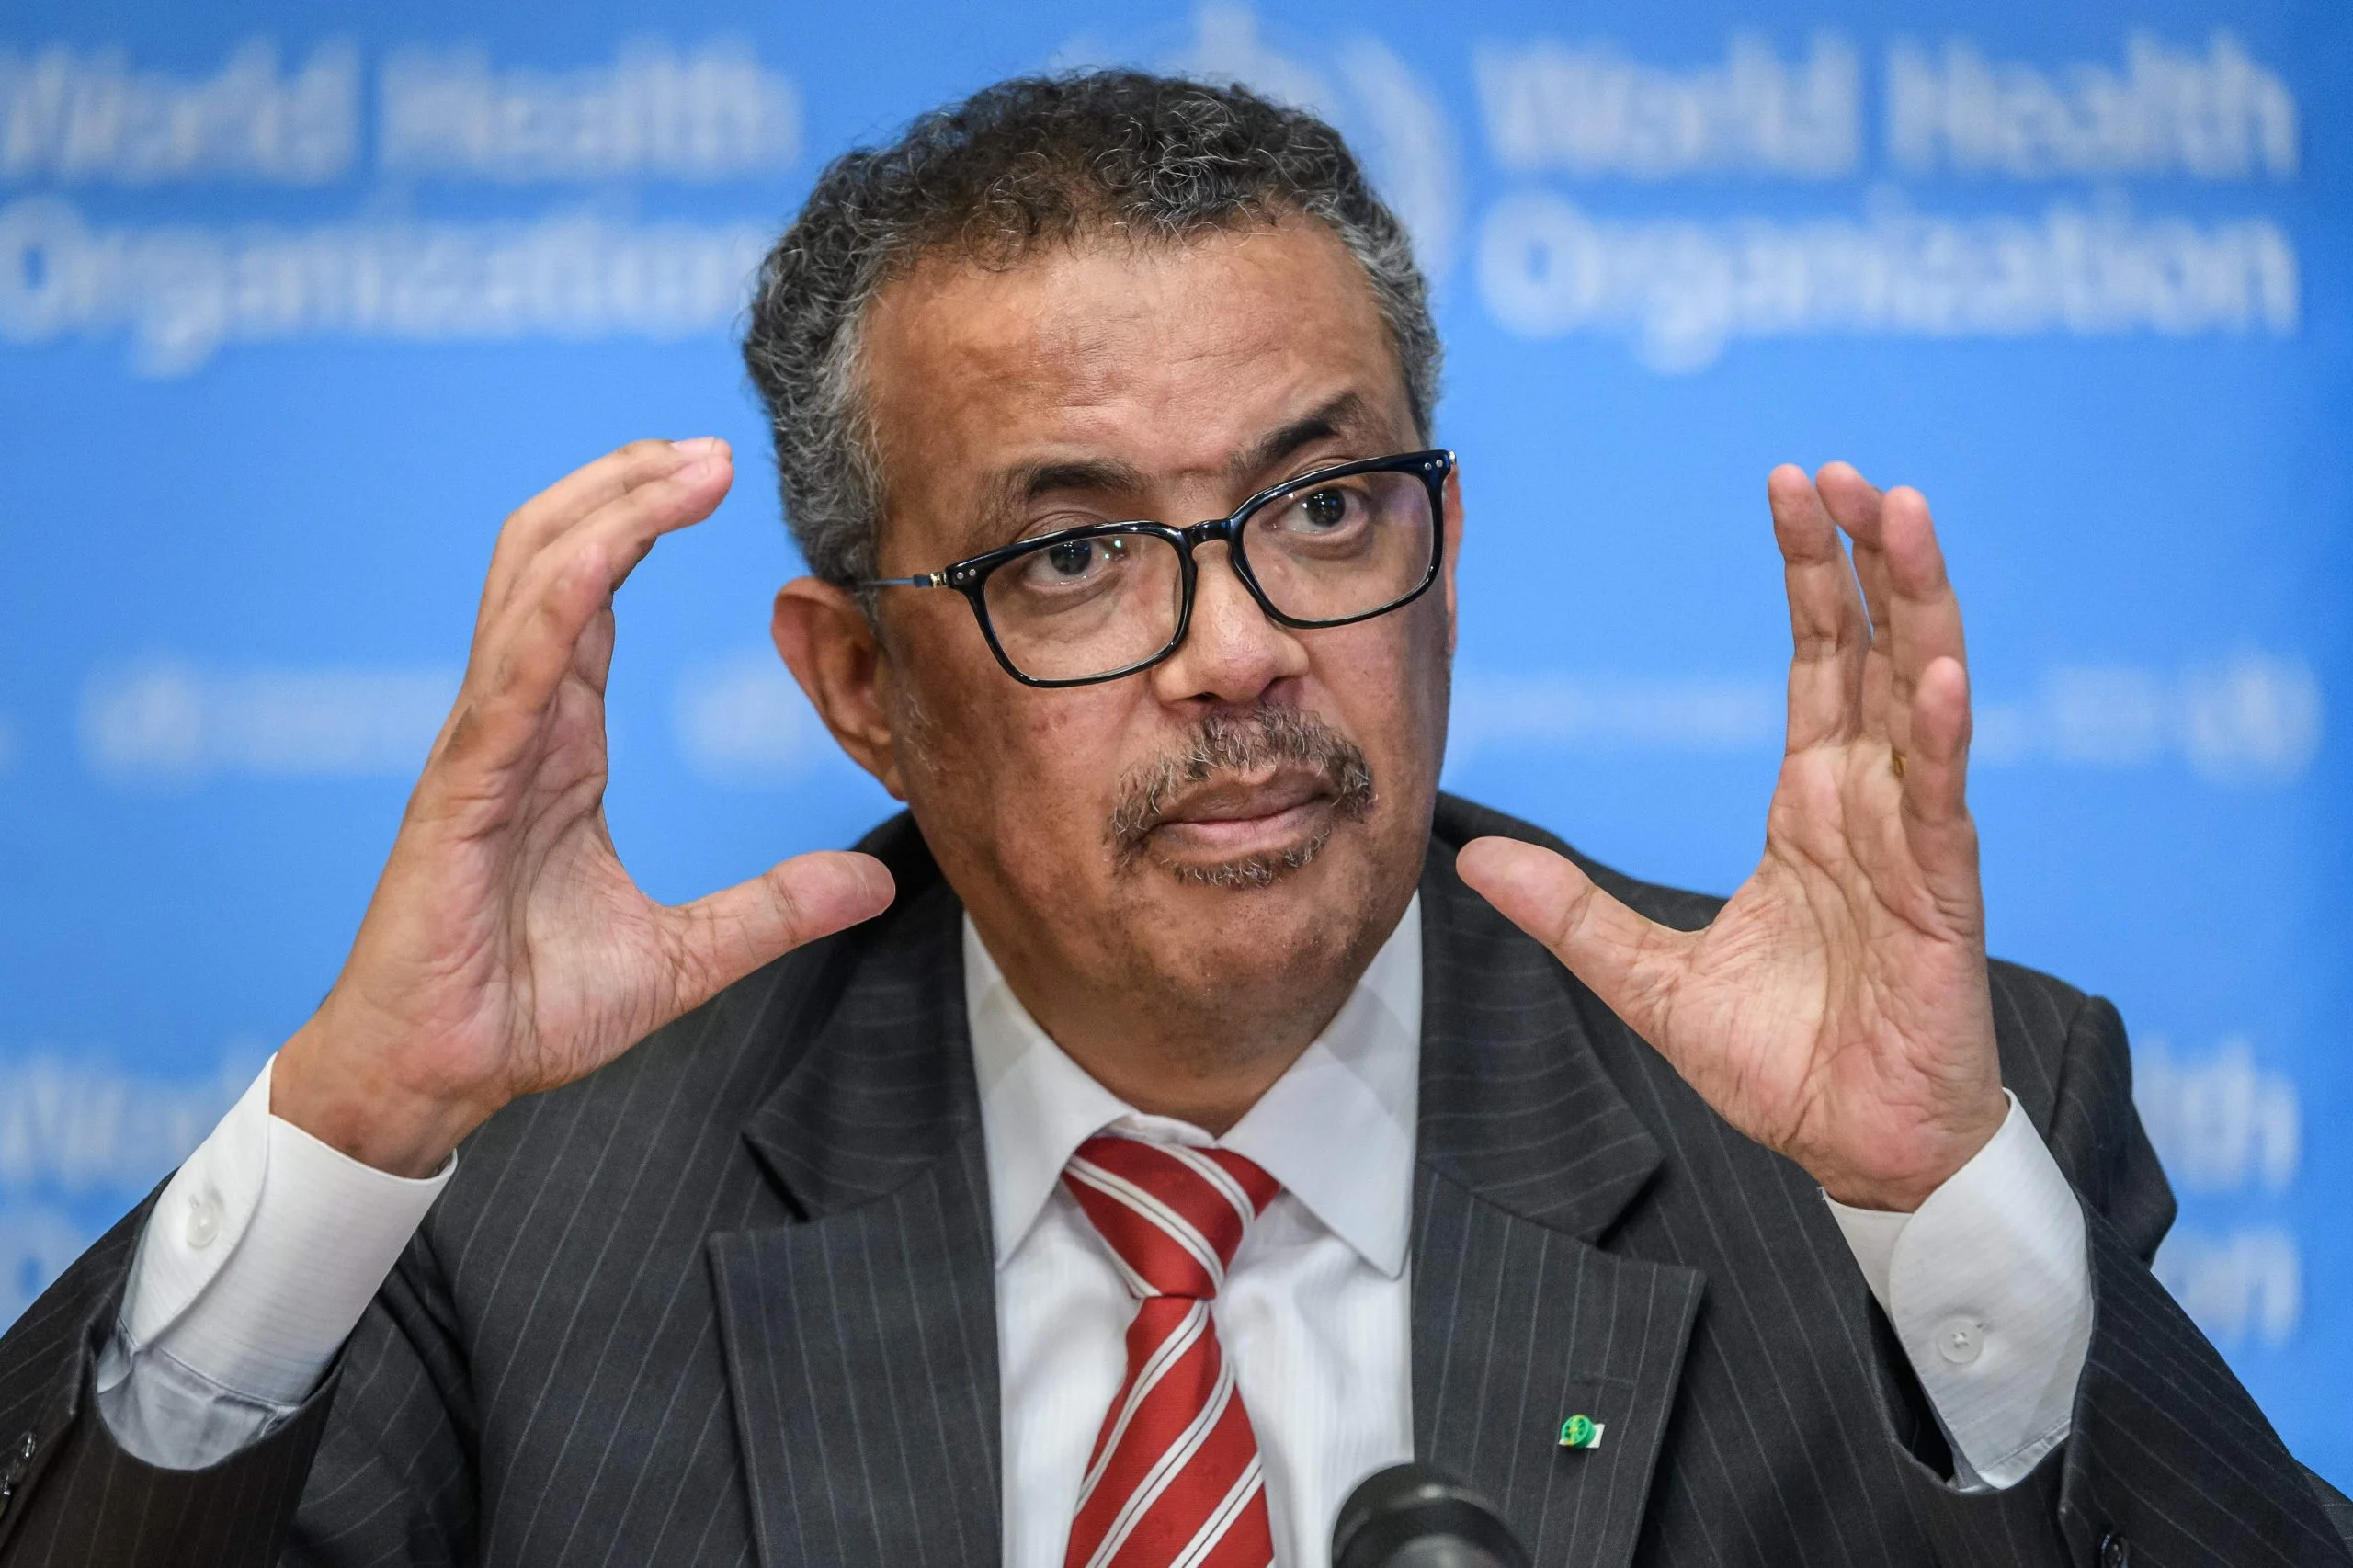 Image of WHO Director-General Dr. Tedros Adhanom